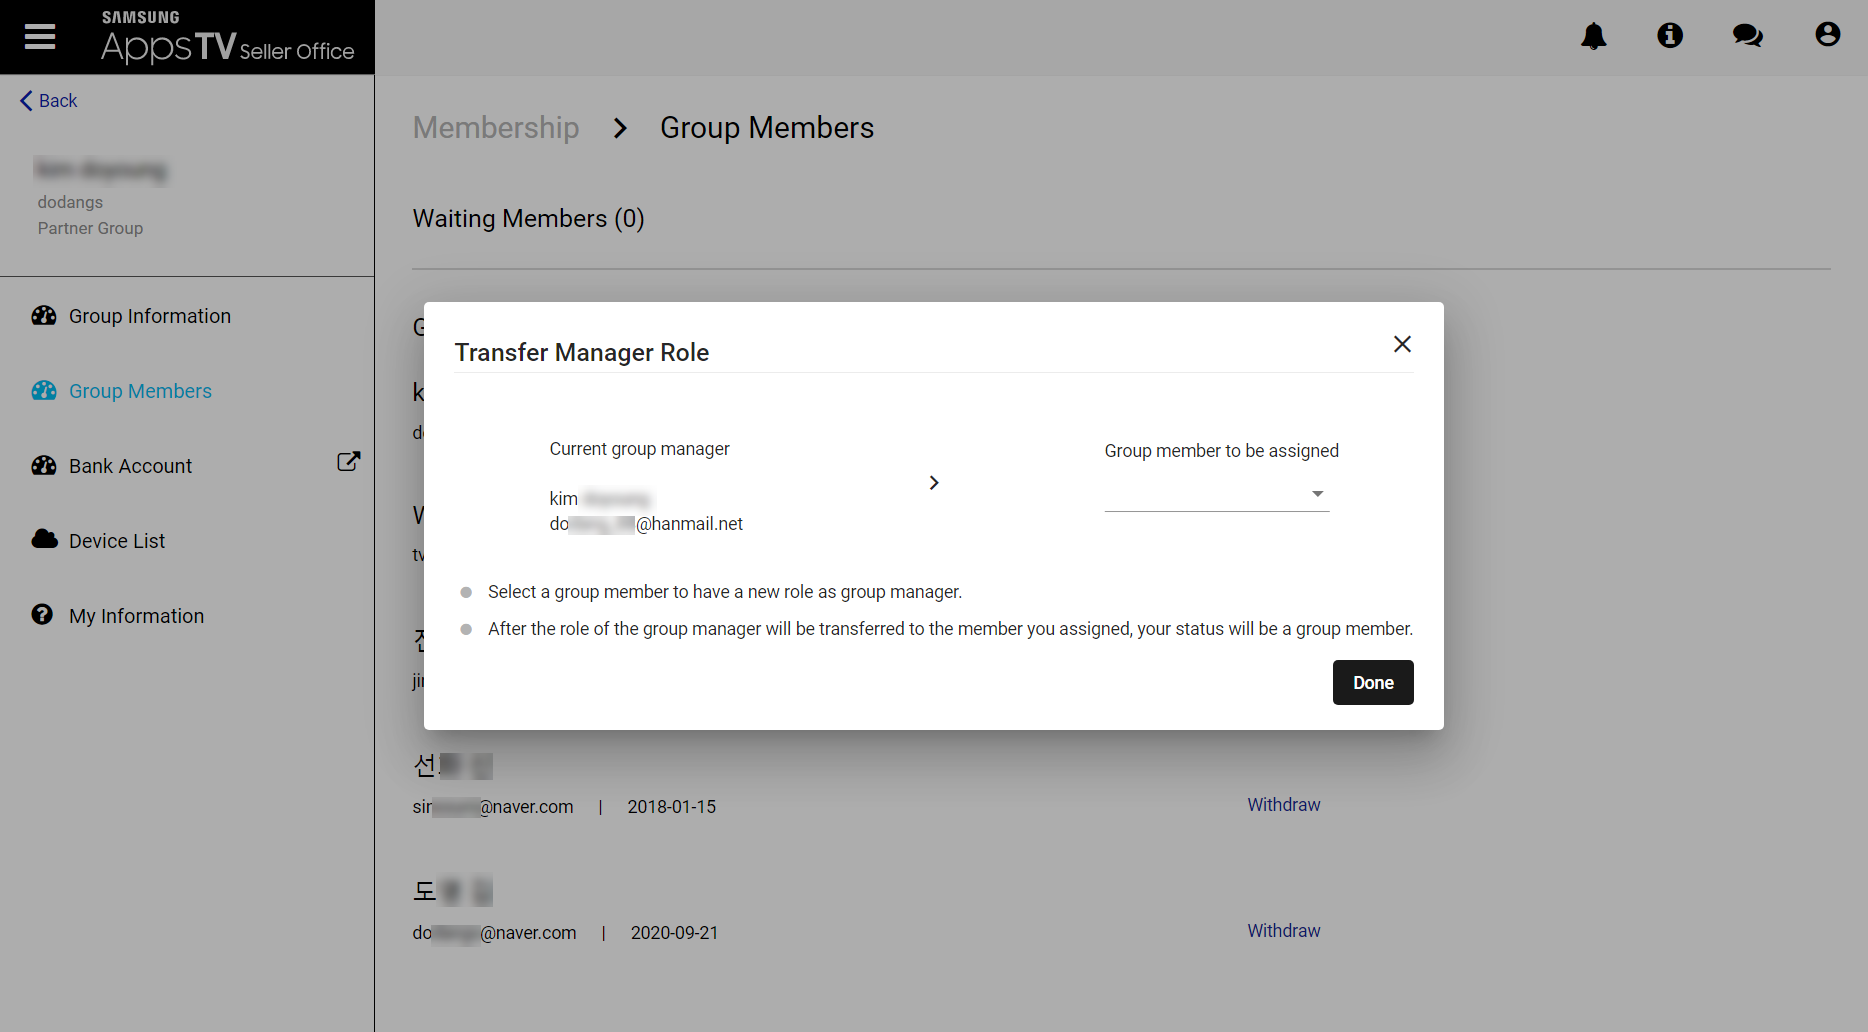 Figure 8. Transfer Manager Role pop-up